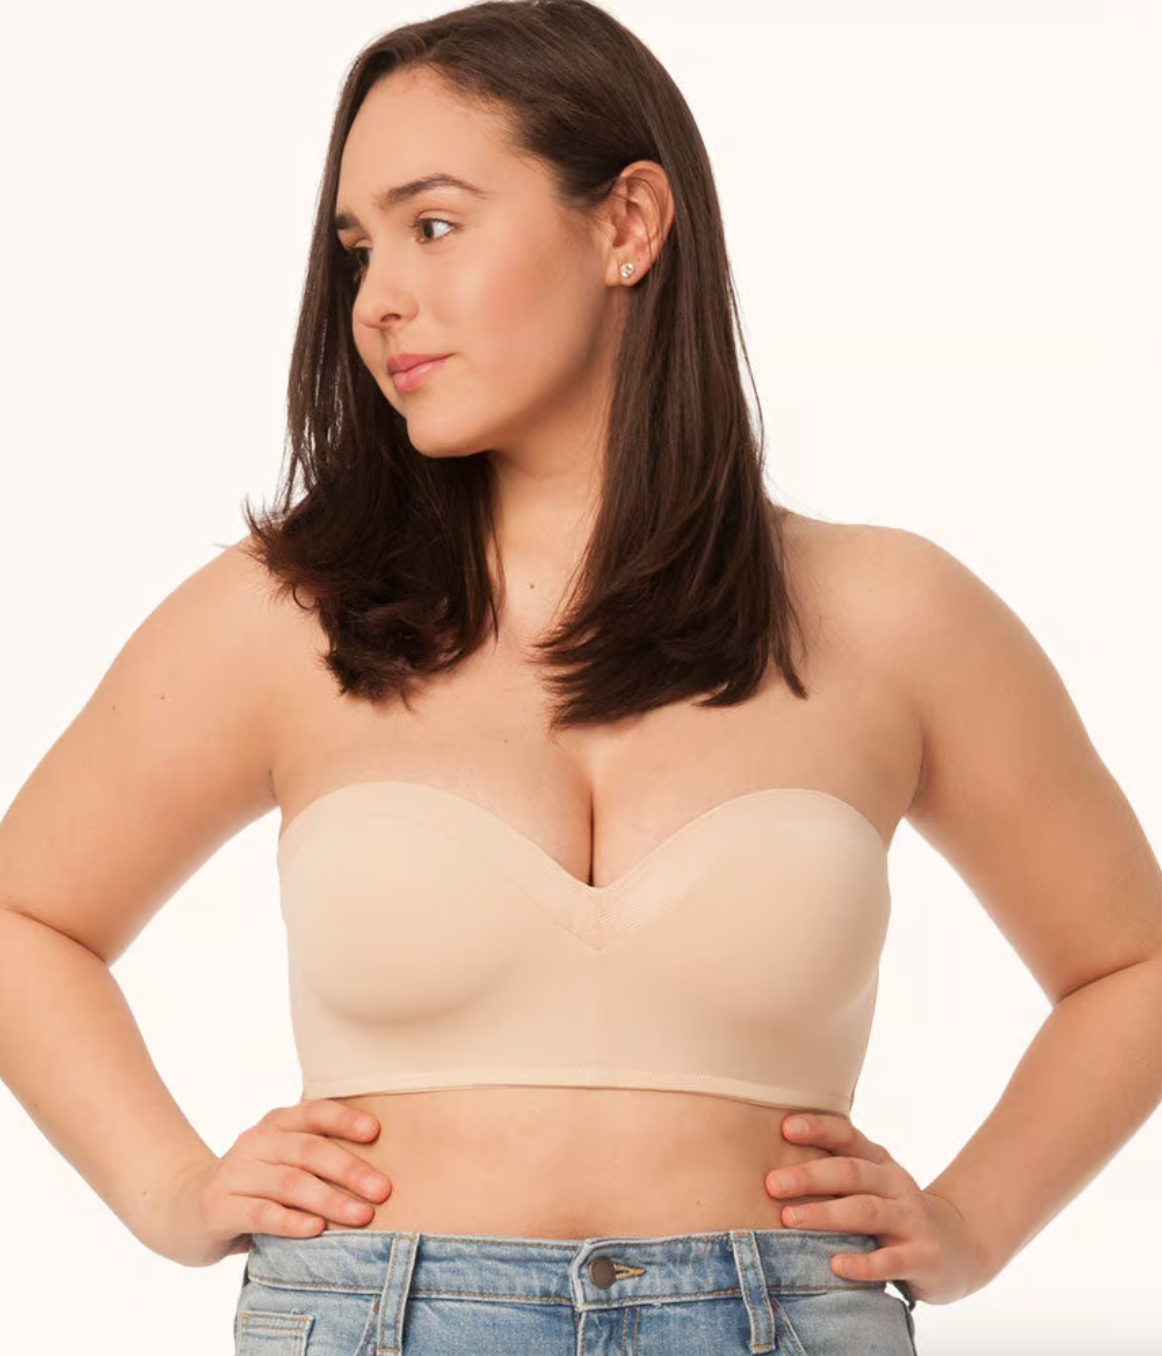 20 Best Strapless Bras You Can Buy